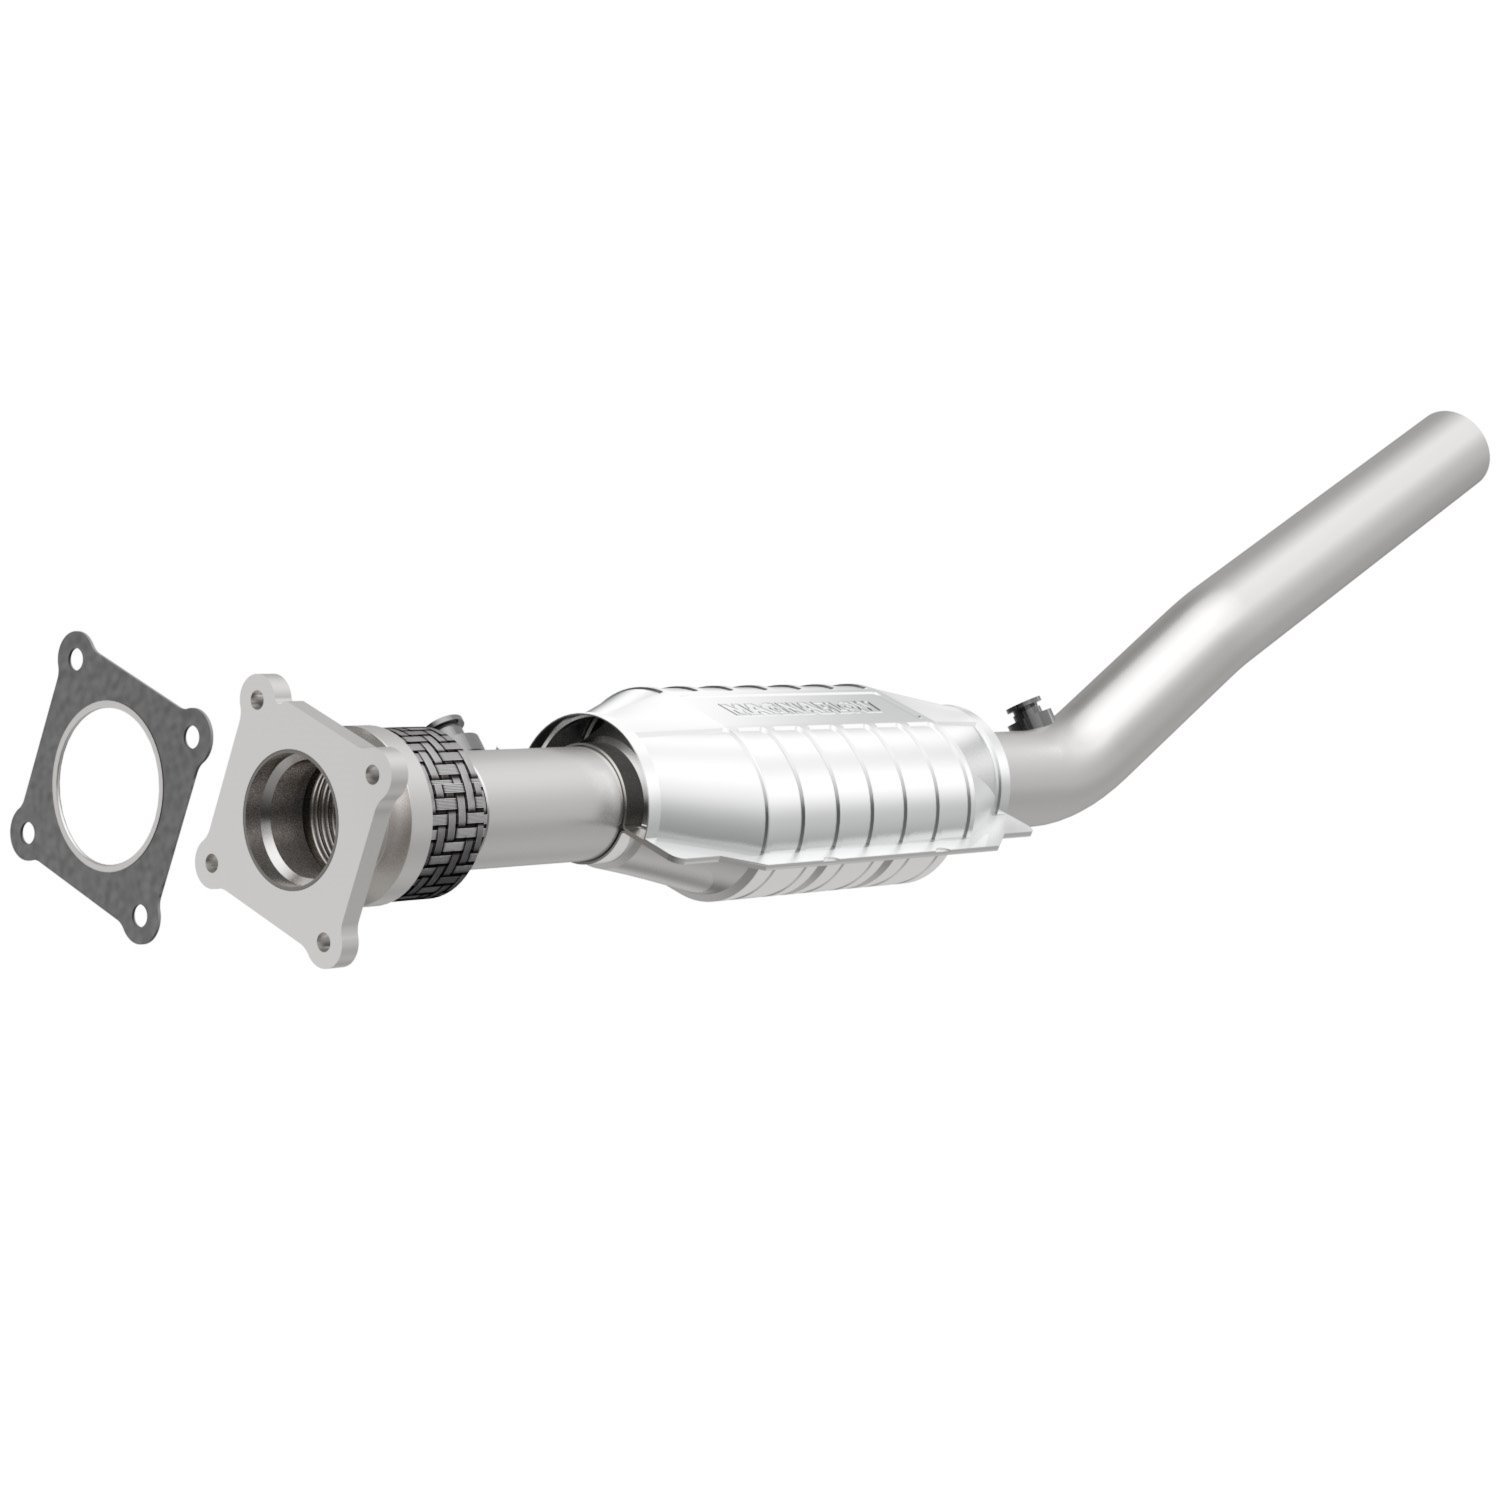 HM Grade Federal / EPA Compliant Direct-Fit Catalytic Converter 23274